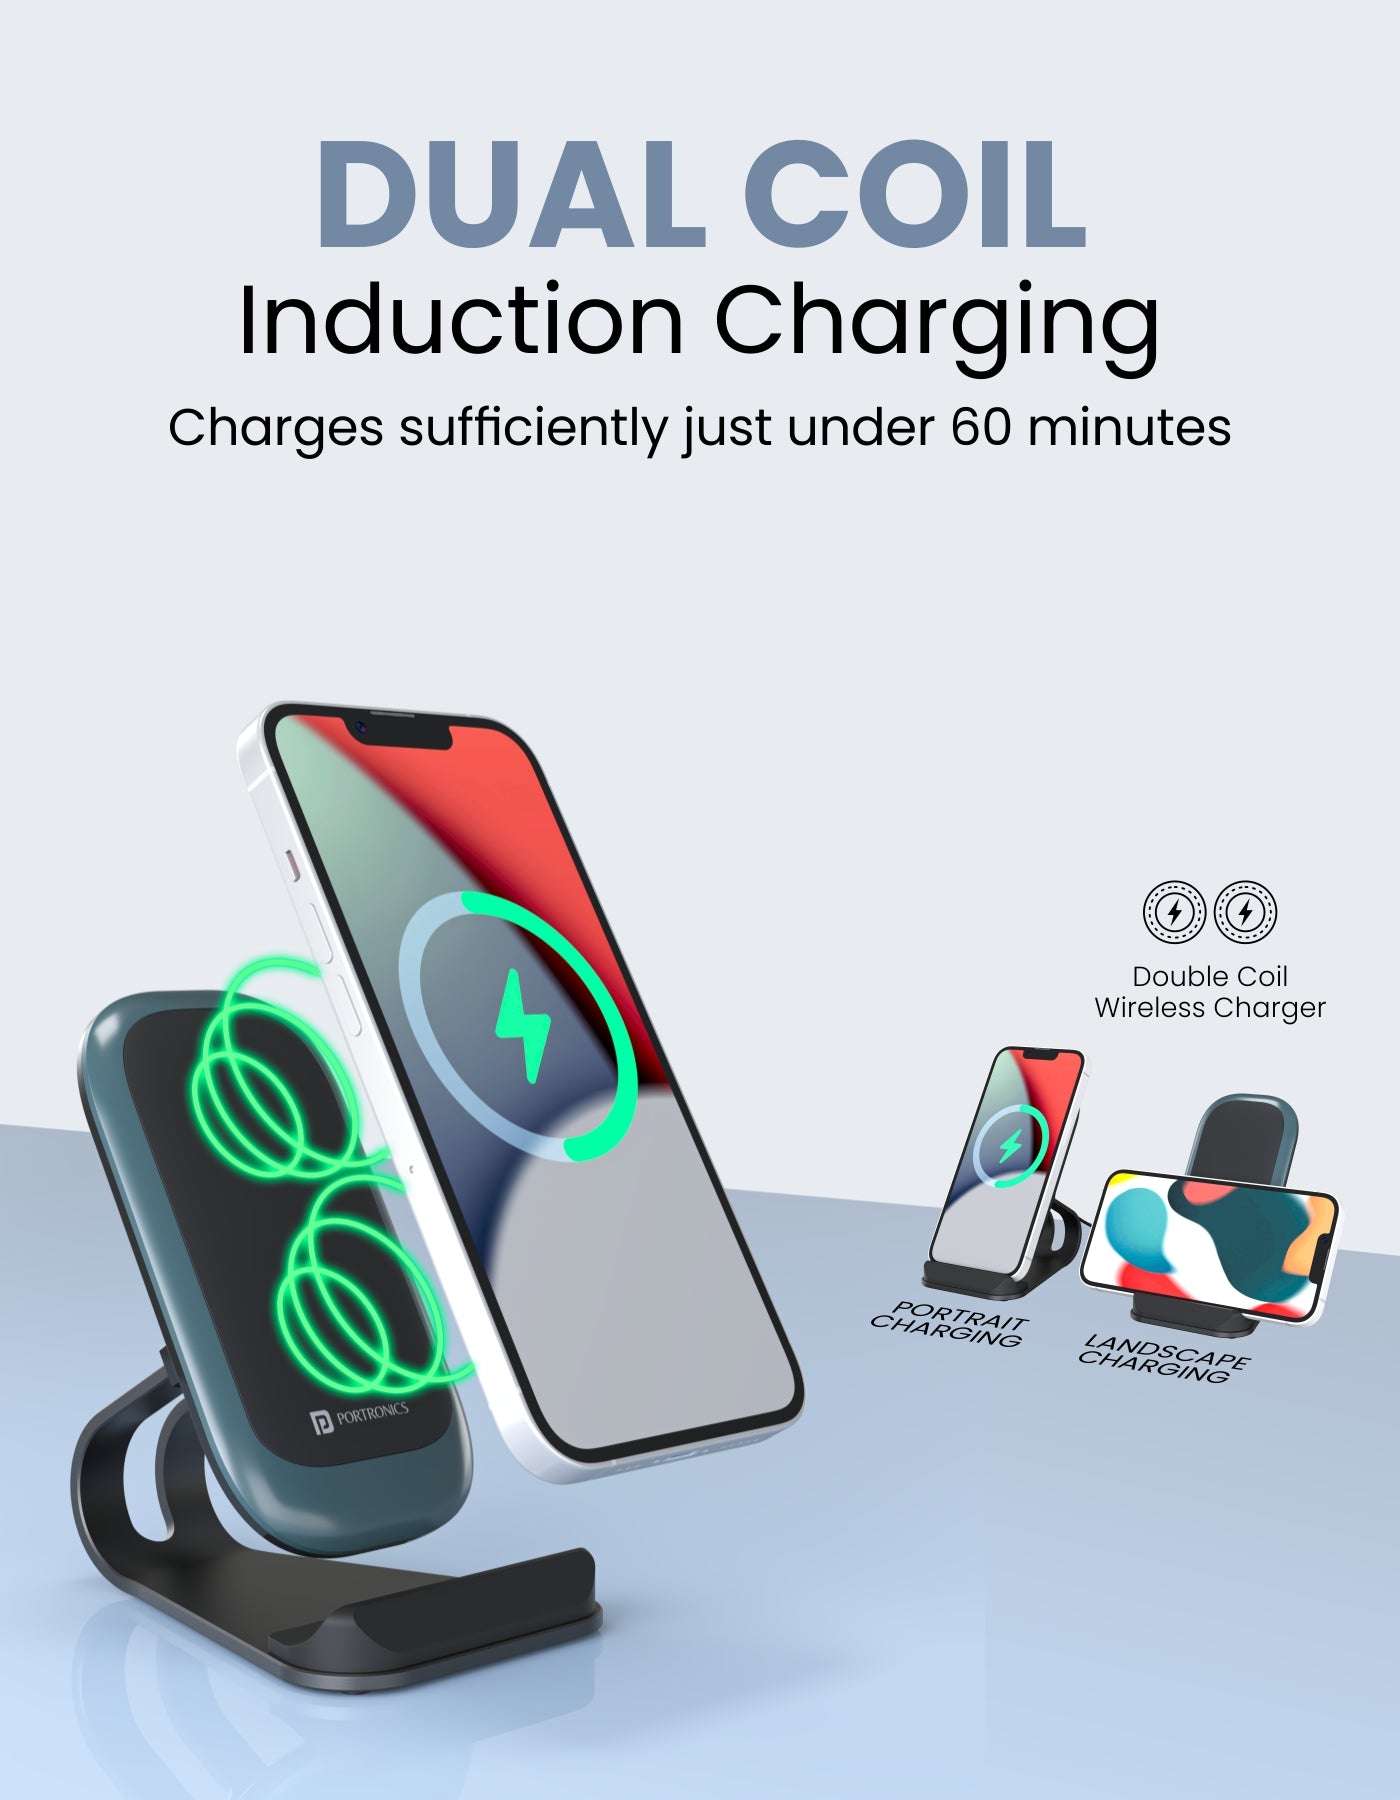 Portronics Freedom 15 Double Coil 15W Wireless Charger charge in 60min